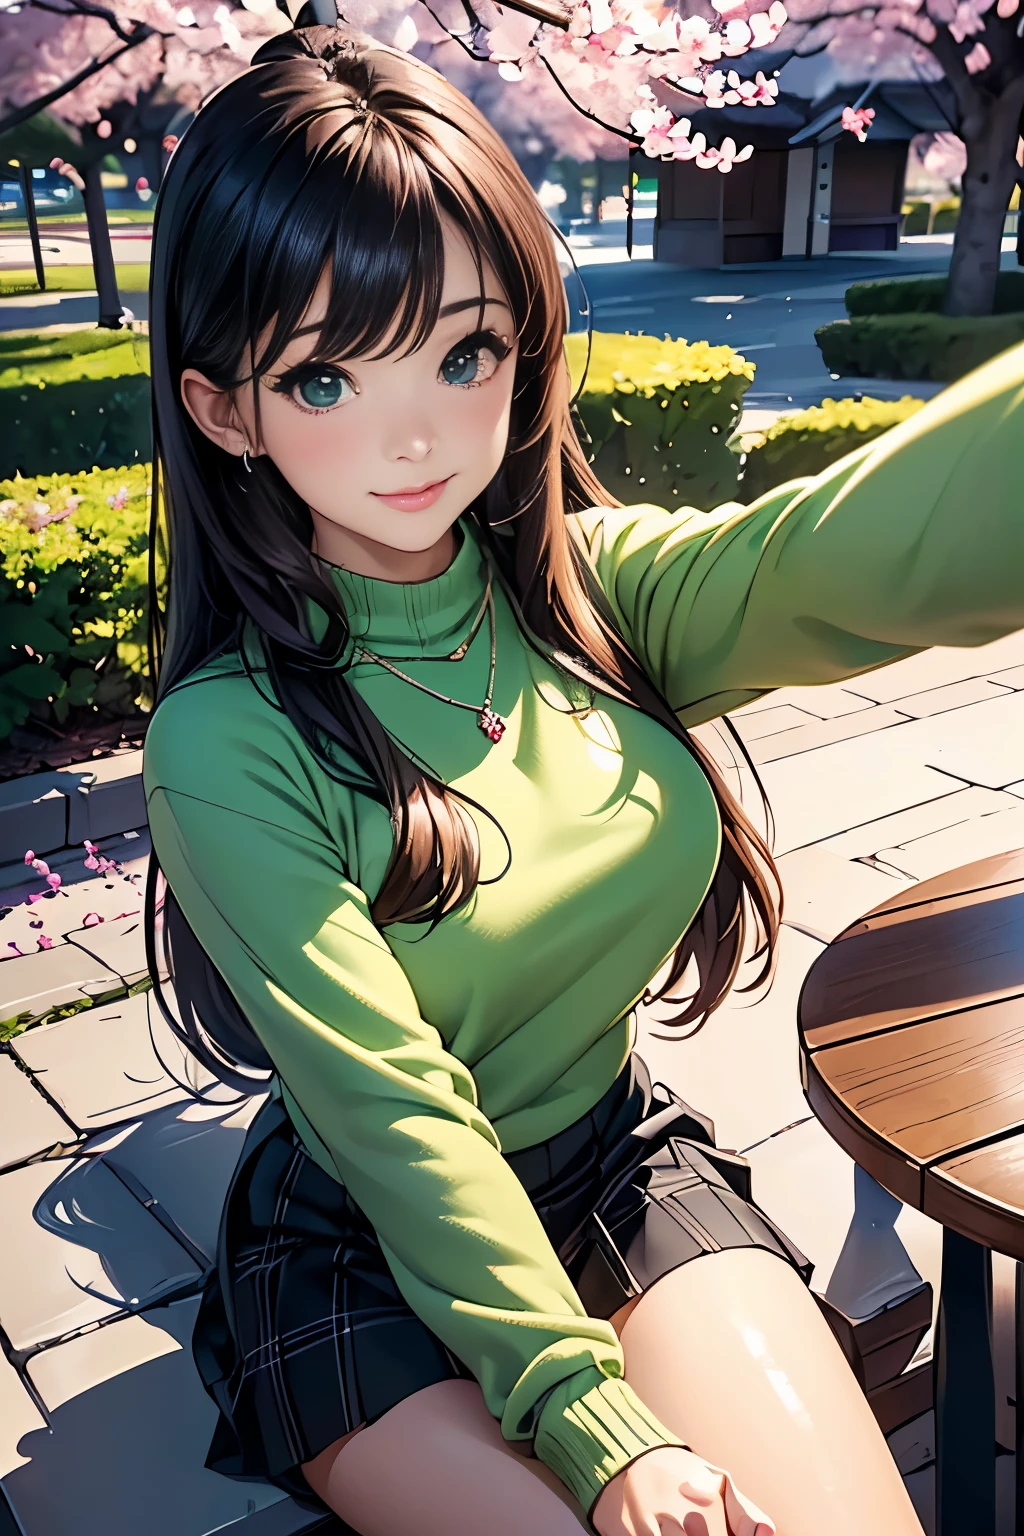 ((table top, highest quality, High resolution, nffsw, perfect pixel, written boundary depth, 4K, nffsw, nffsw))), 1 girl, single, alone, beautiful anime girl, beautiful art style, anime character, ((long hair, bangs, brown hair)), ((green eyes:1.4, round eyes, beautiful eyelashes, realistic eyes)), ((detailed face, blush:1.2)), ((smooth texture:0.75, realistic texture:0.65, realistic:1.1, Anime CG style)),  dynamic angle,  ((throw, Selfie Pose, portrait)), ((Black sweater, long sleeve, black skirt, plaid skirt, Fashionable, 1 diamond necklace)), smile,  amusement park, ((cherry blossoms, cherry blossomsの花が散る))